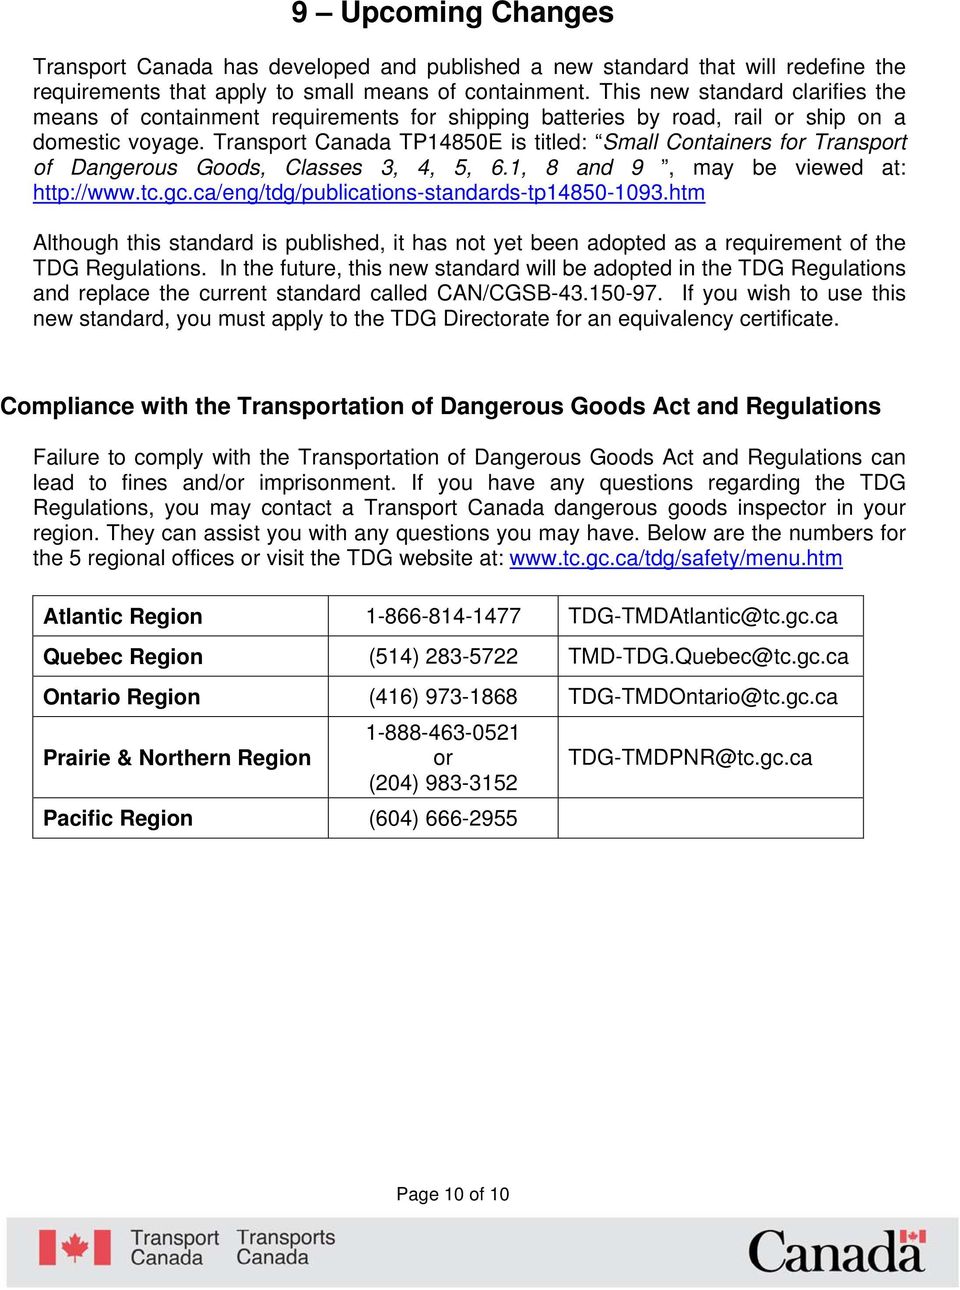 Transport Canada TP14850E is titled: Small Containers for Transport of Dangerous Goods, Classes 3, 4, 5, 6.1, 8 and 9, may be viewed at: http://www.tc.gc.